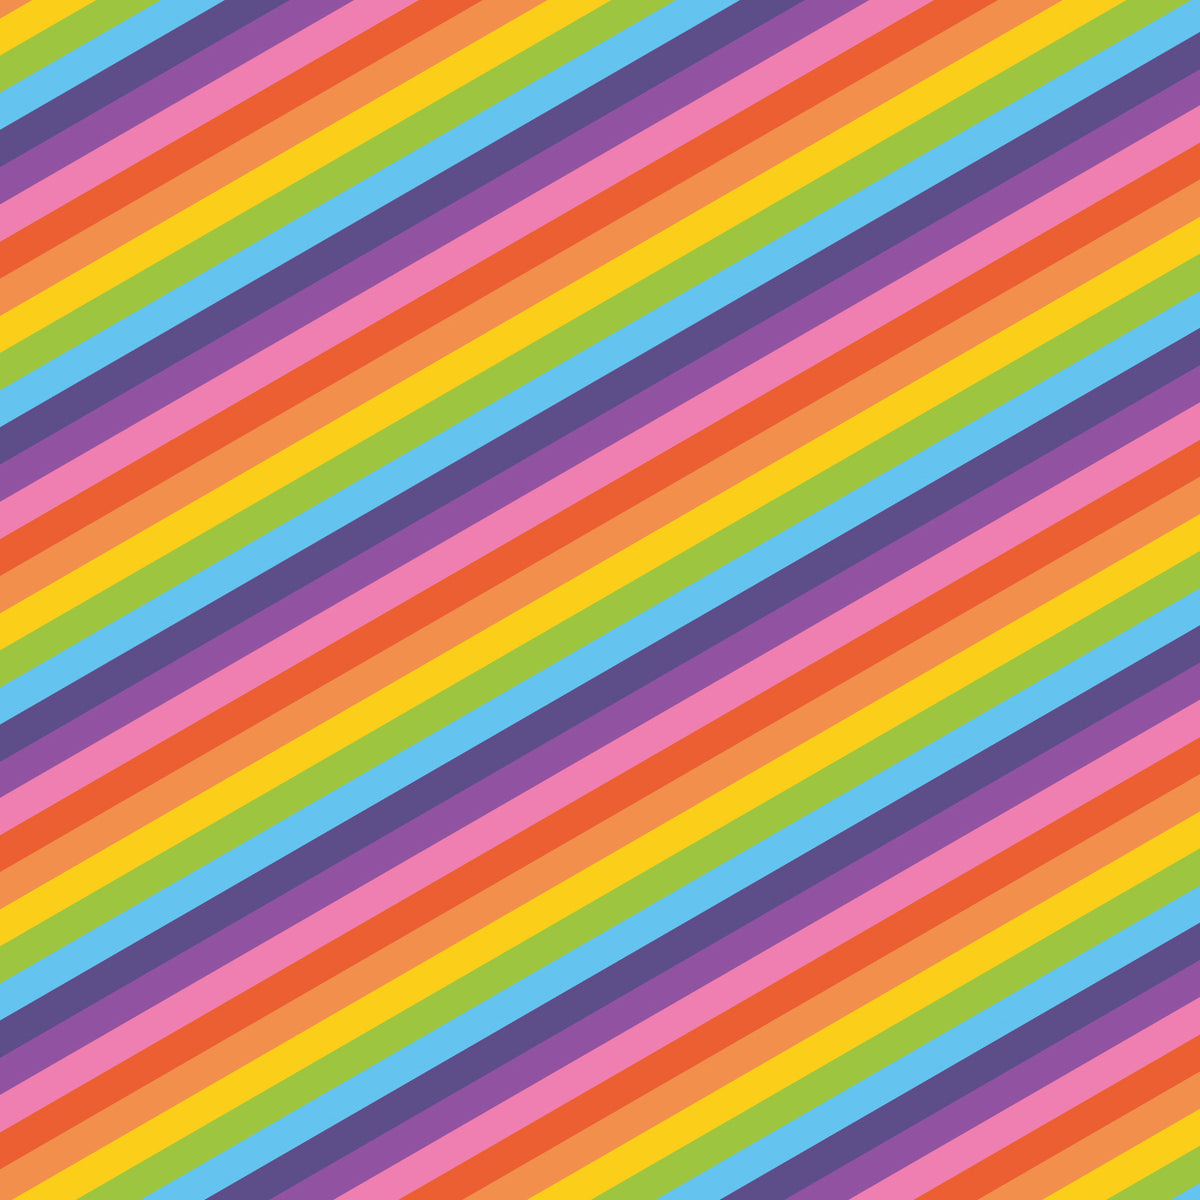 Decor Store 6 Sheet Wrapping Paper Rainbow Stripe Pattern All